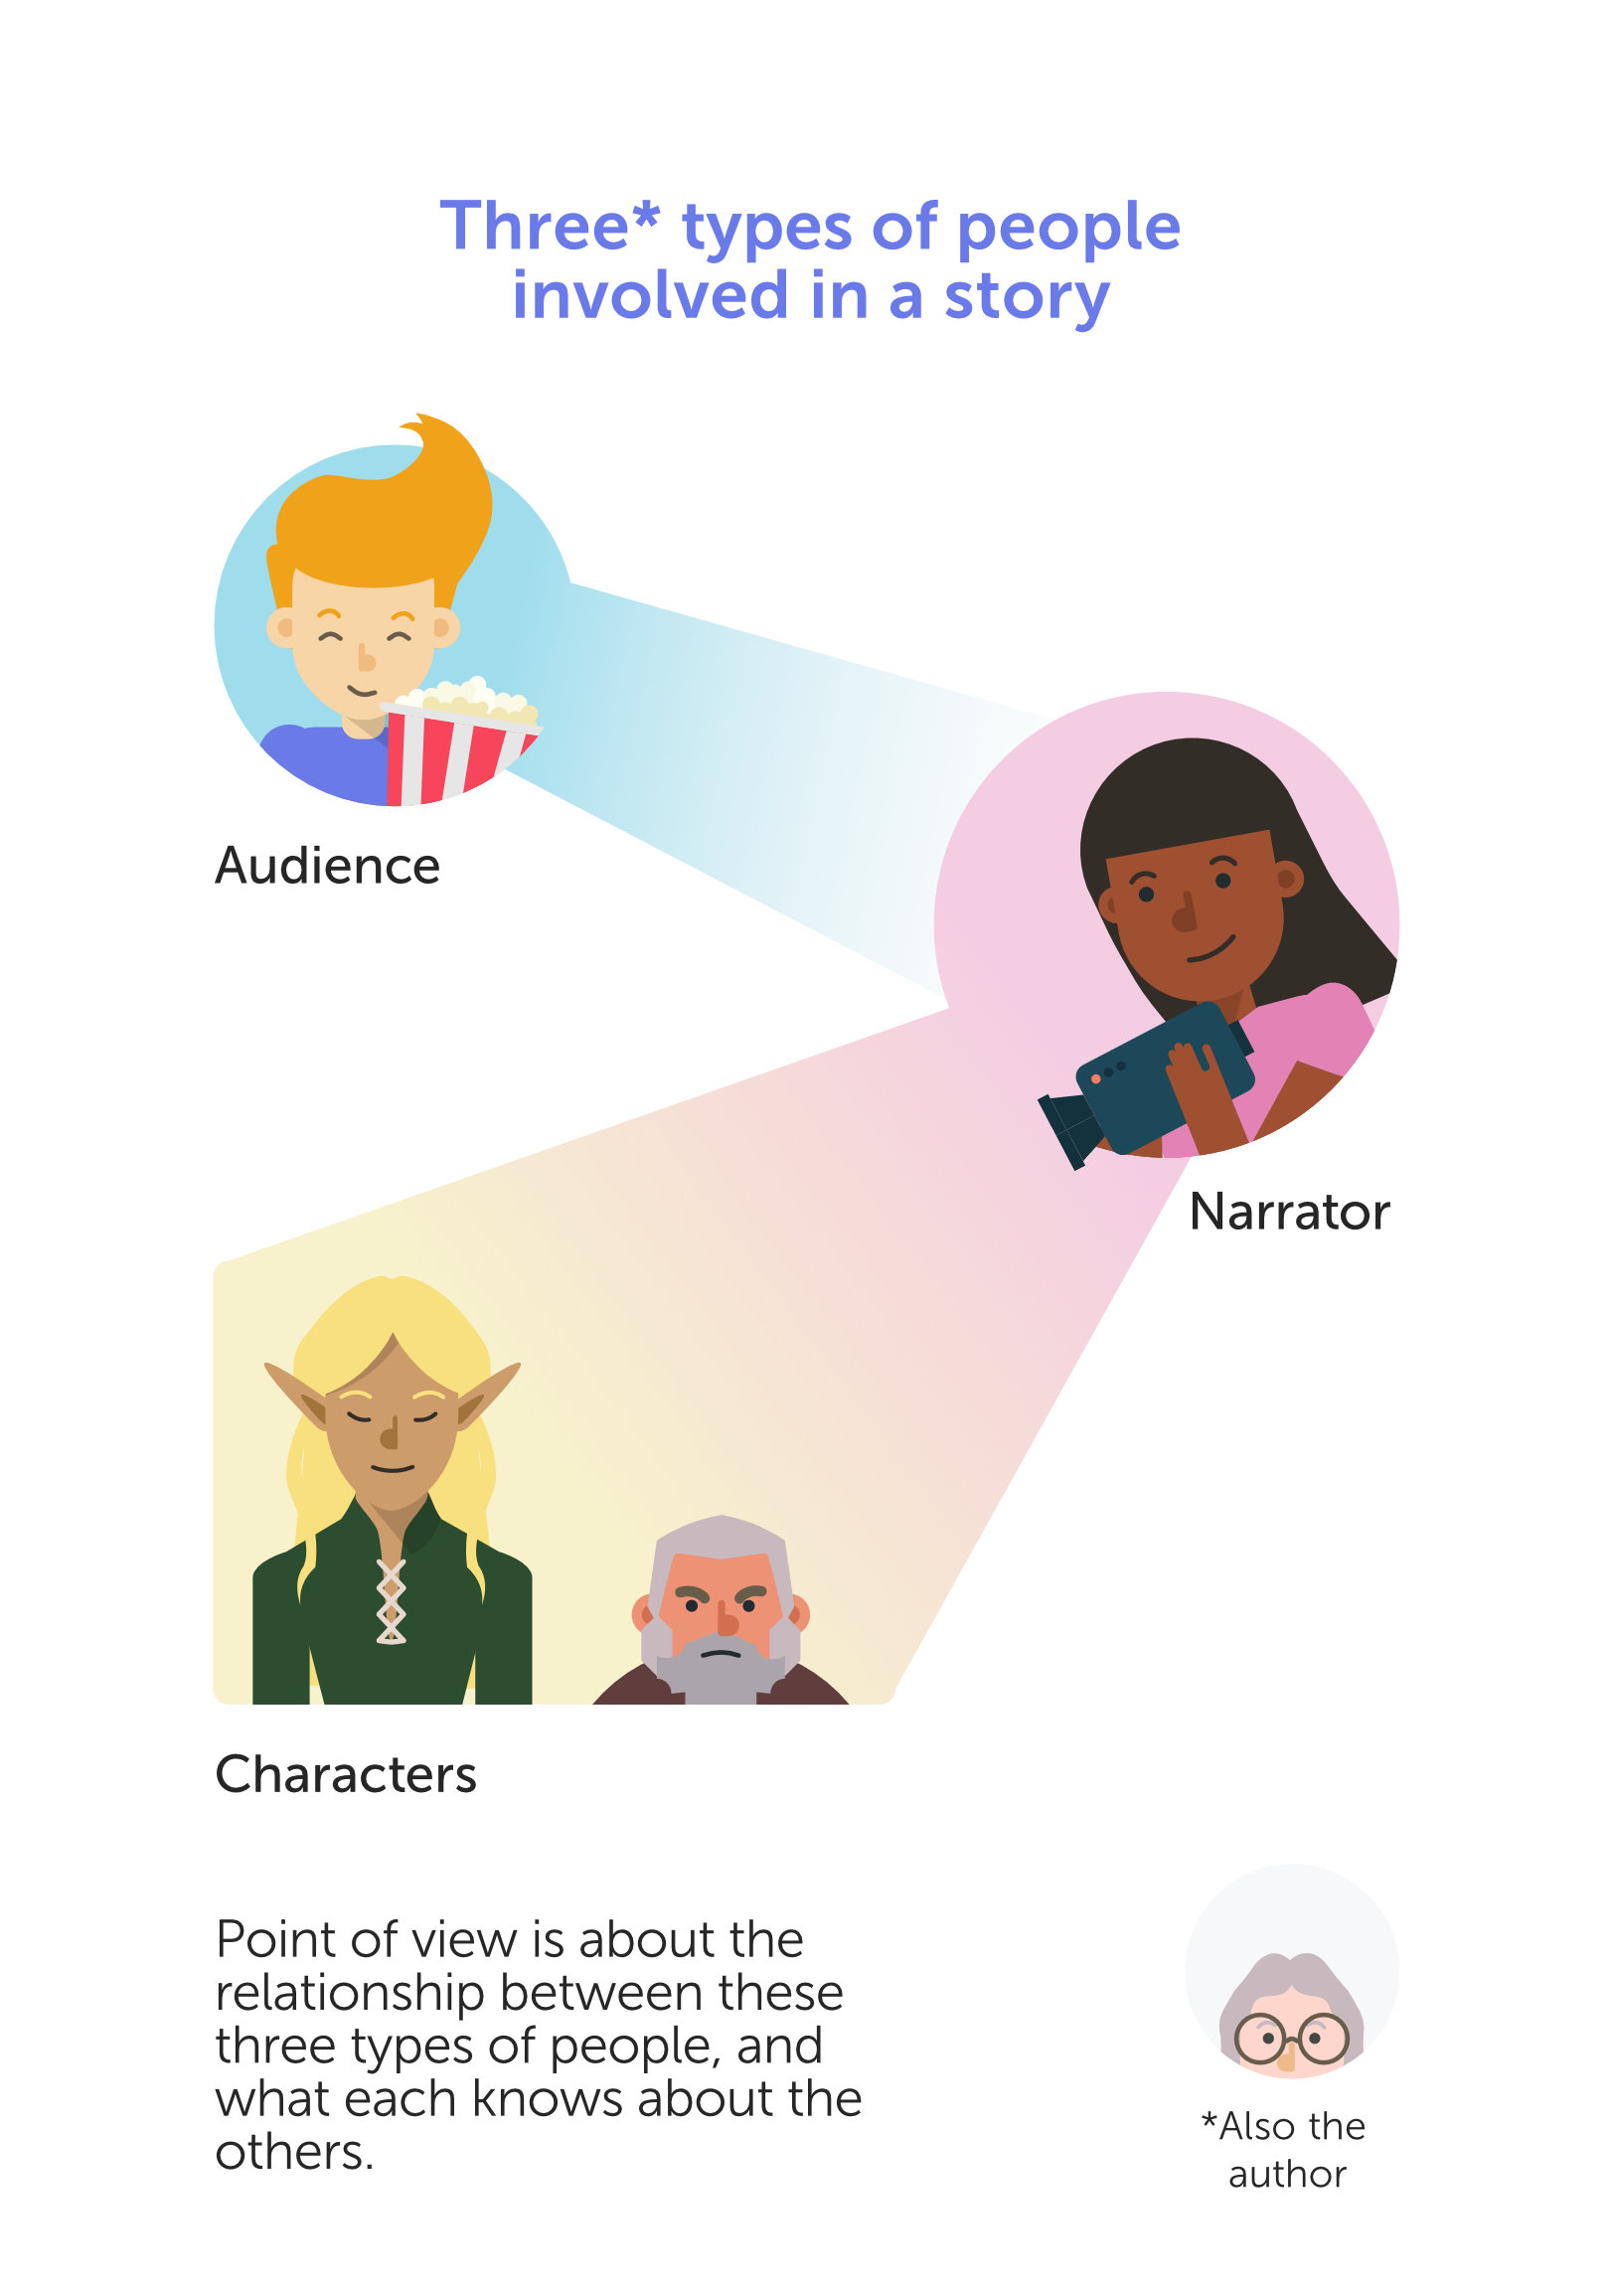 graphic showing audience, narrator, and characters (an elf and a dwarf). And also the author.